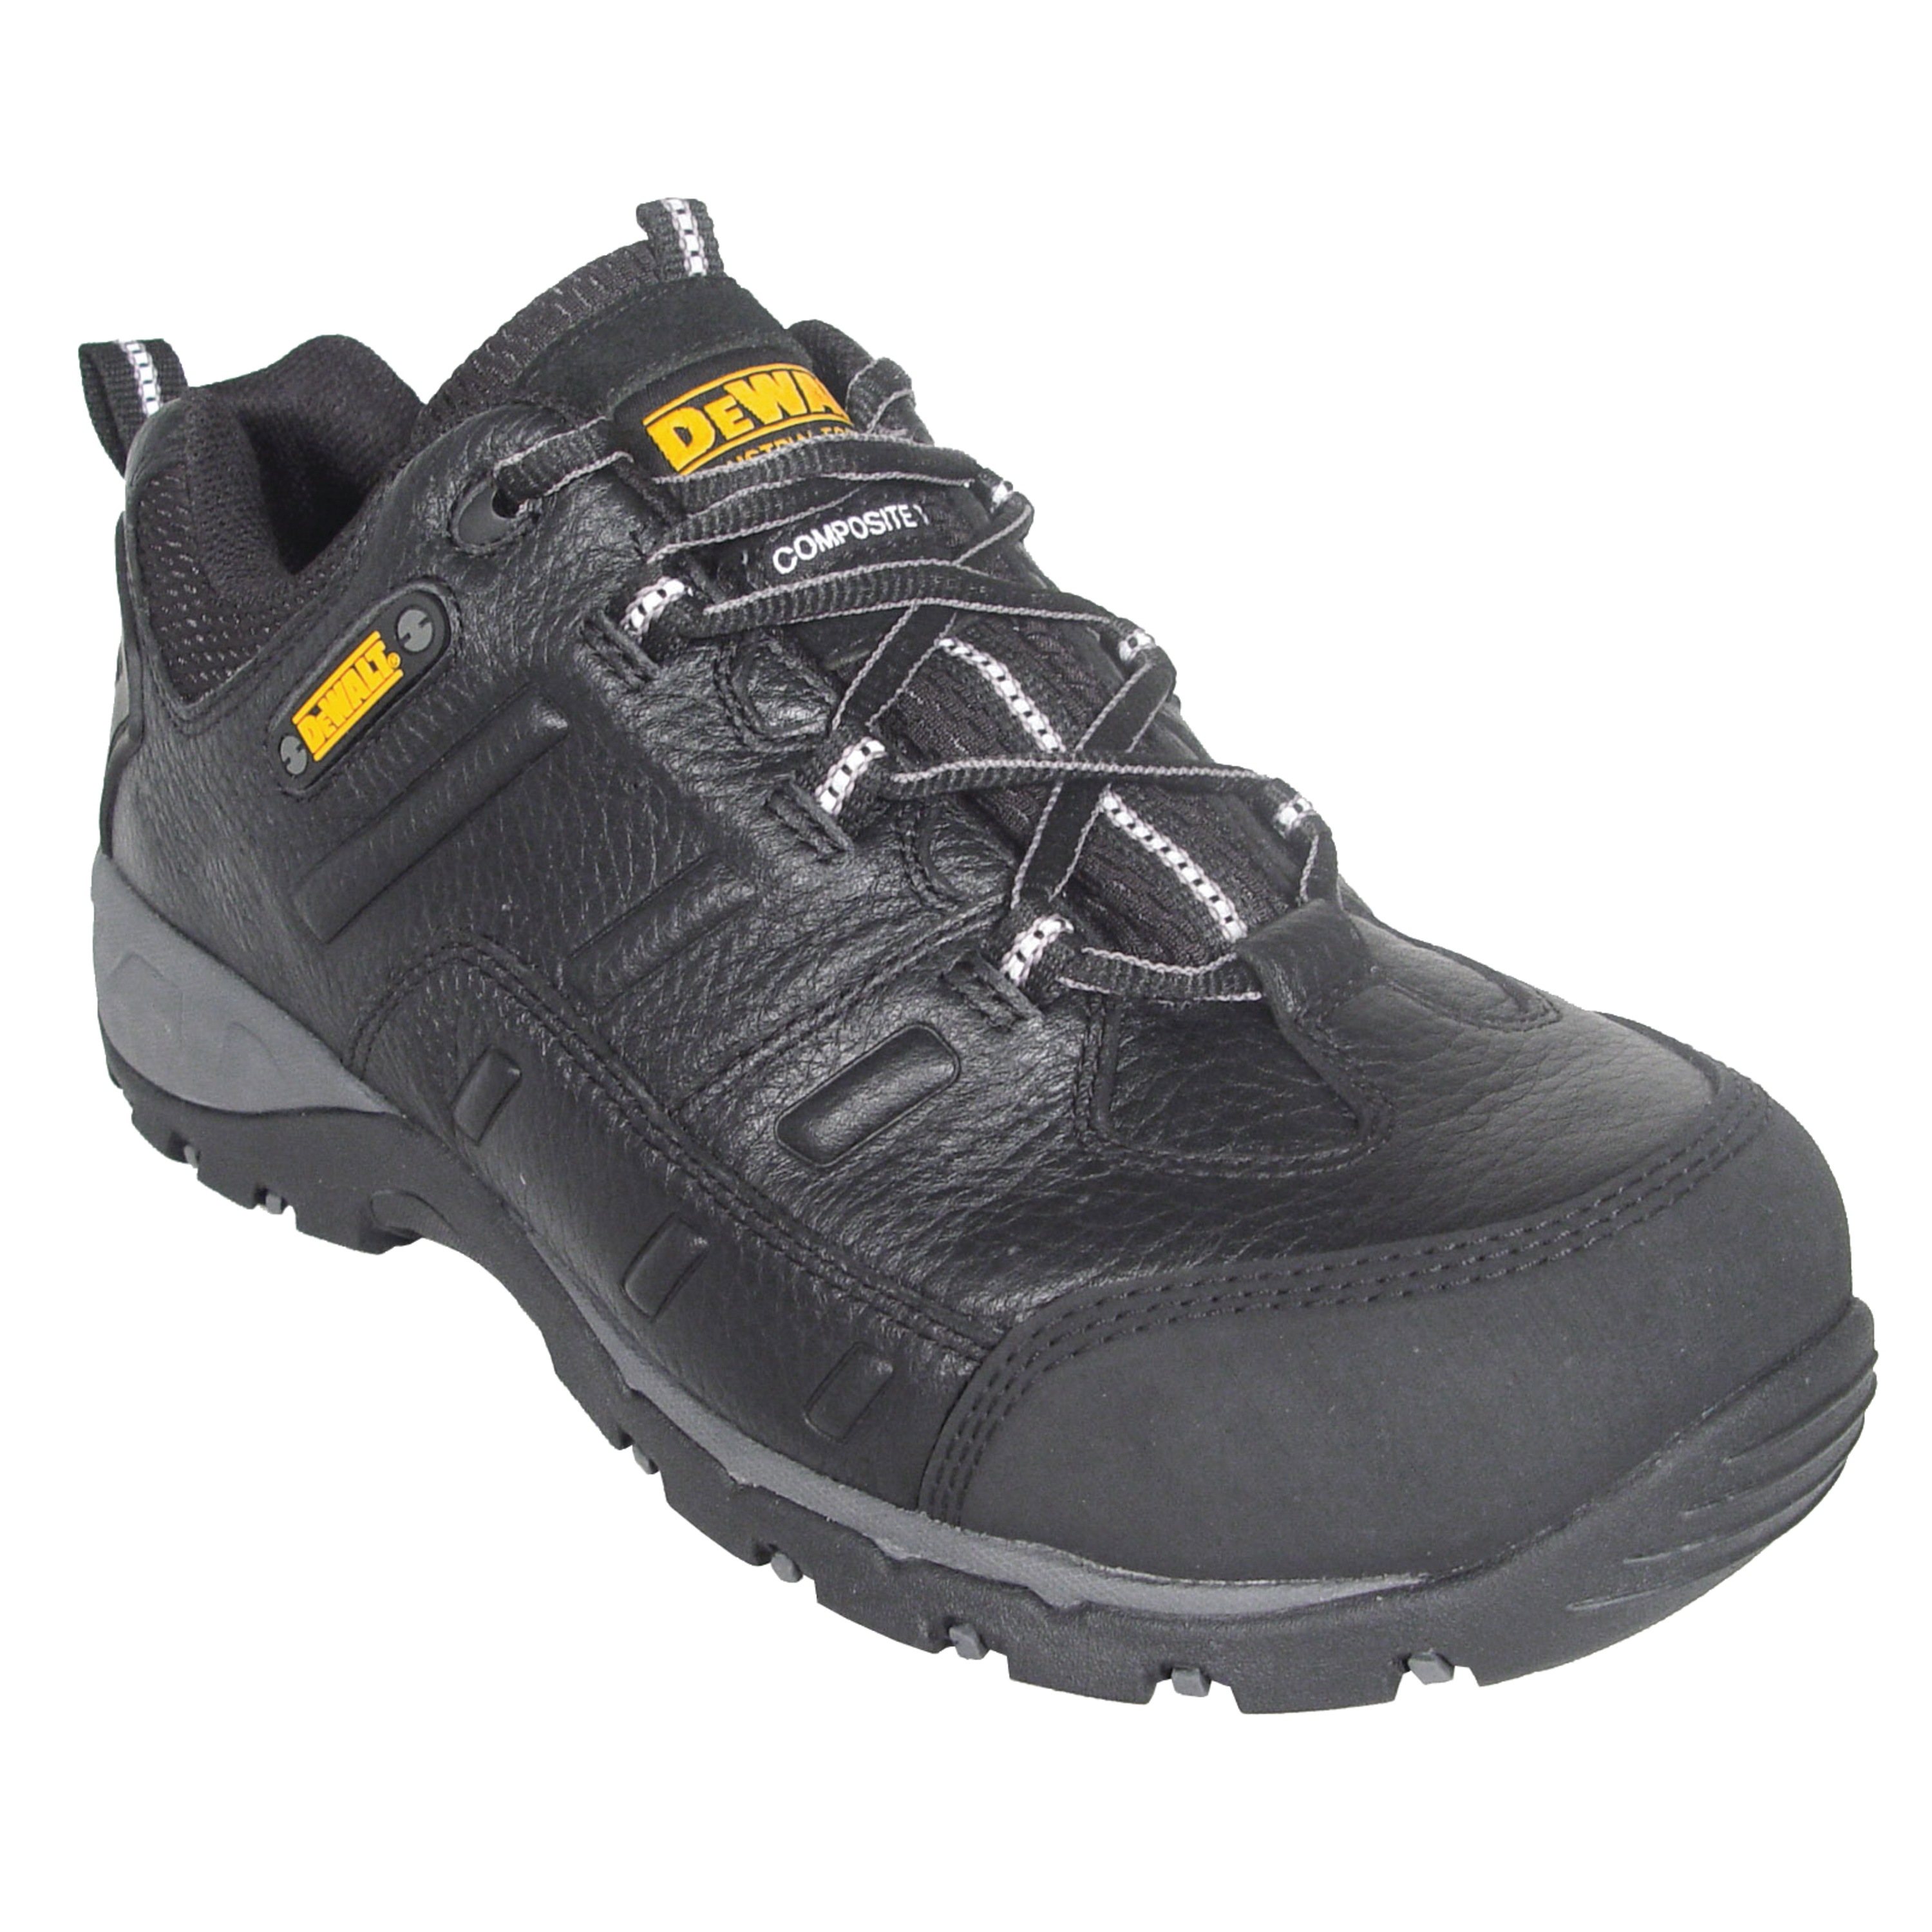 composite safety shoes near me